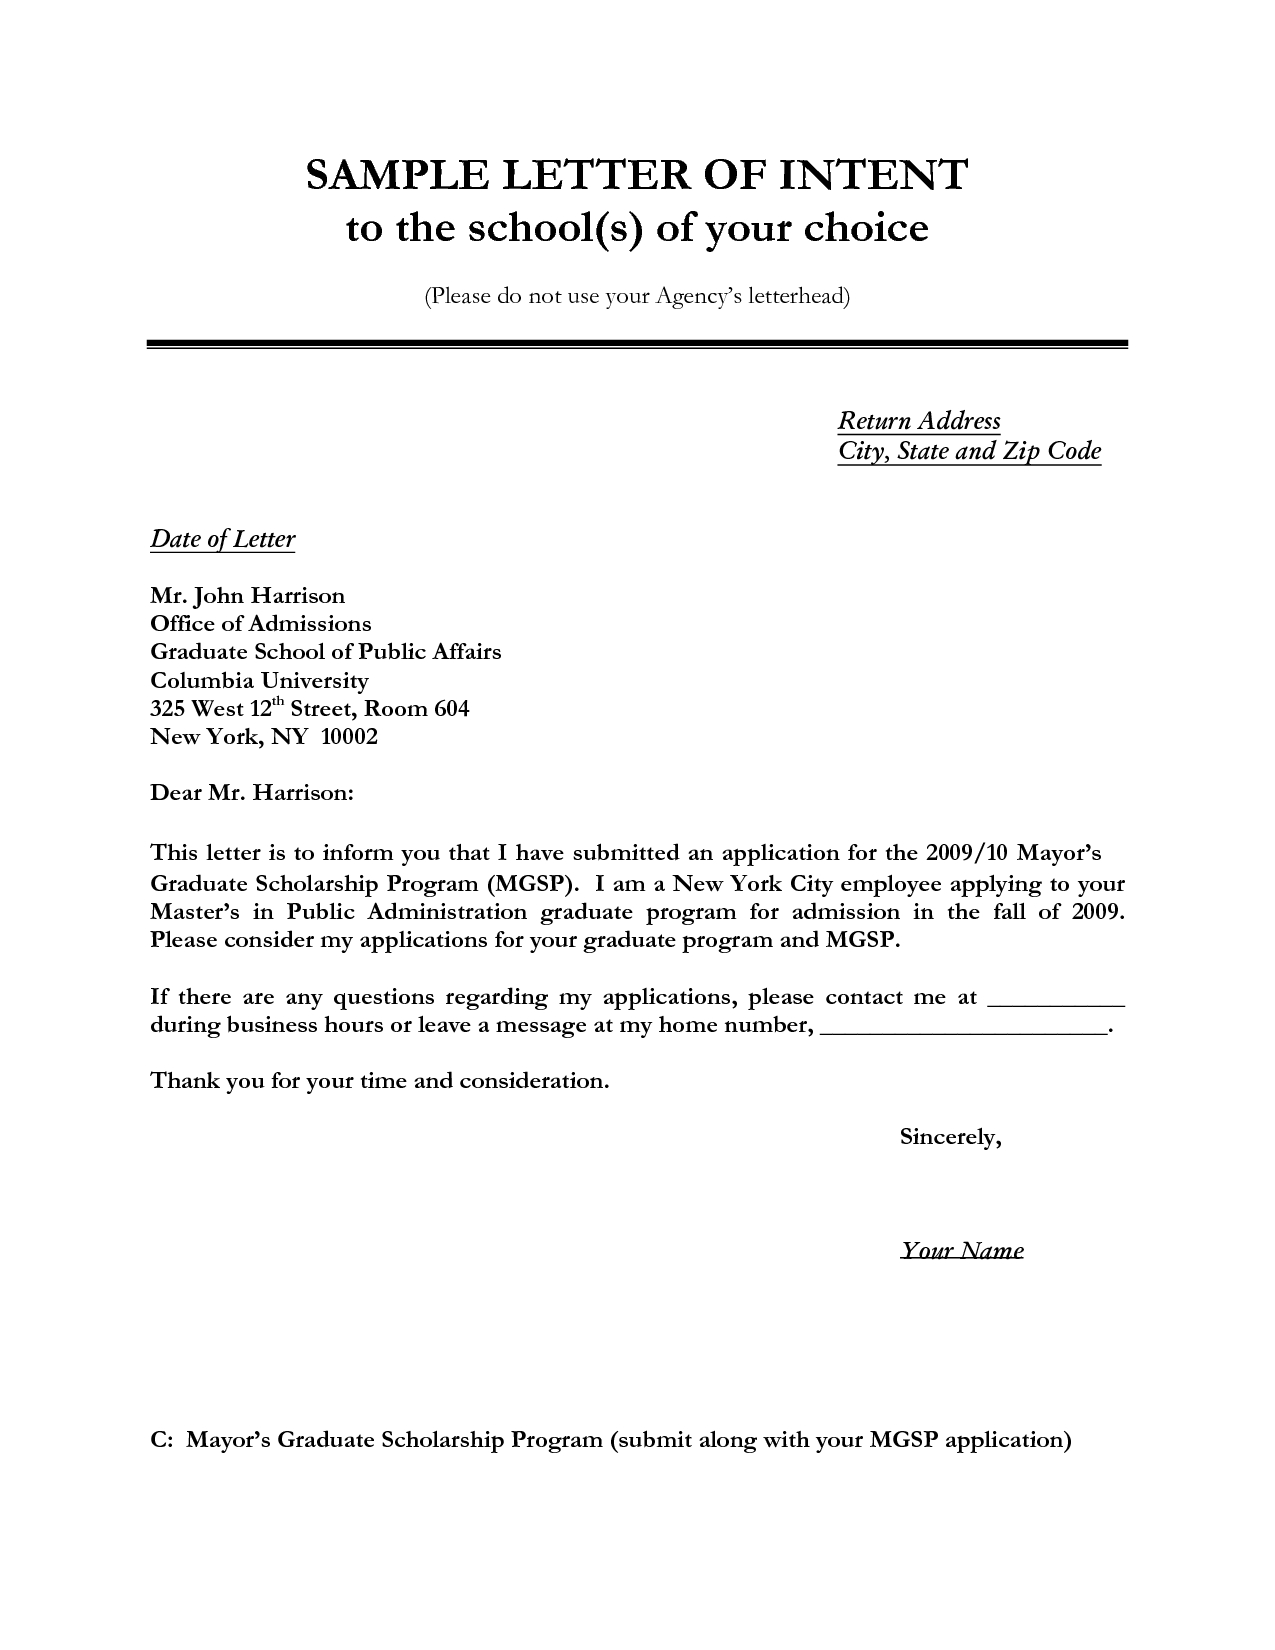 Letter Of Intent for Graduate School Template - Letter Of Intent Sample